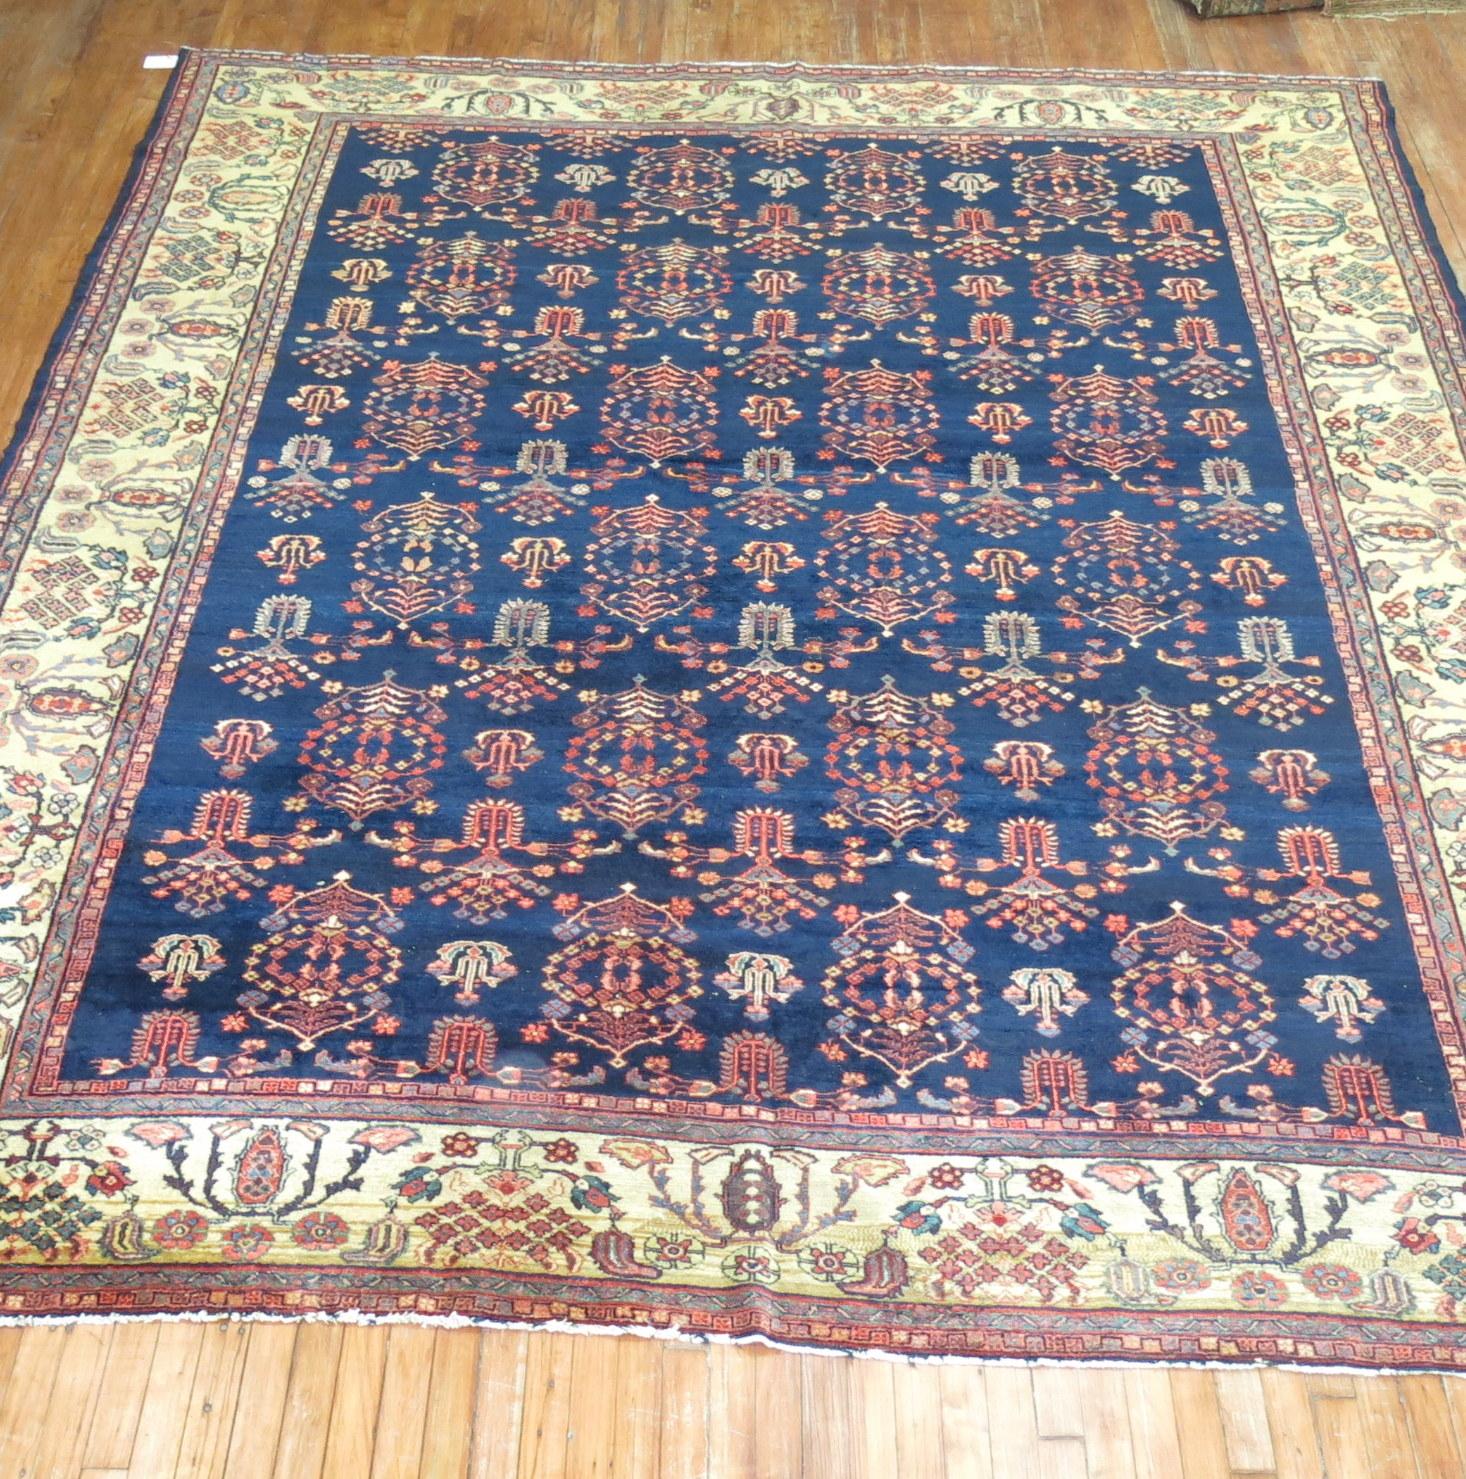 An authentic early 20th-century Sarouk Ferehan navy blue field carpet with an all-over geometric pattern
Measures: 9'5